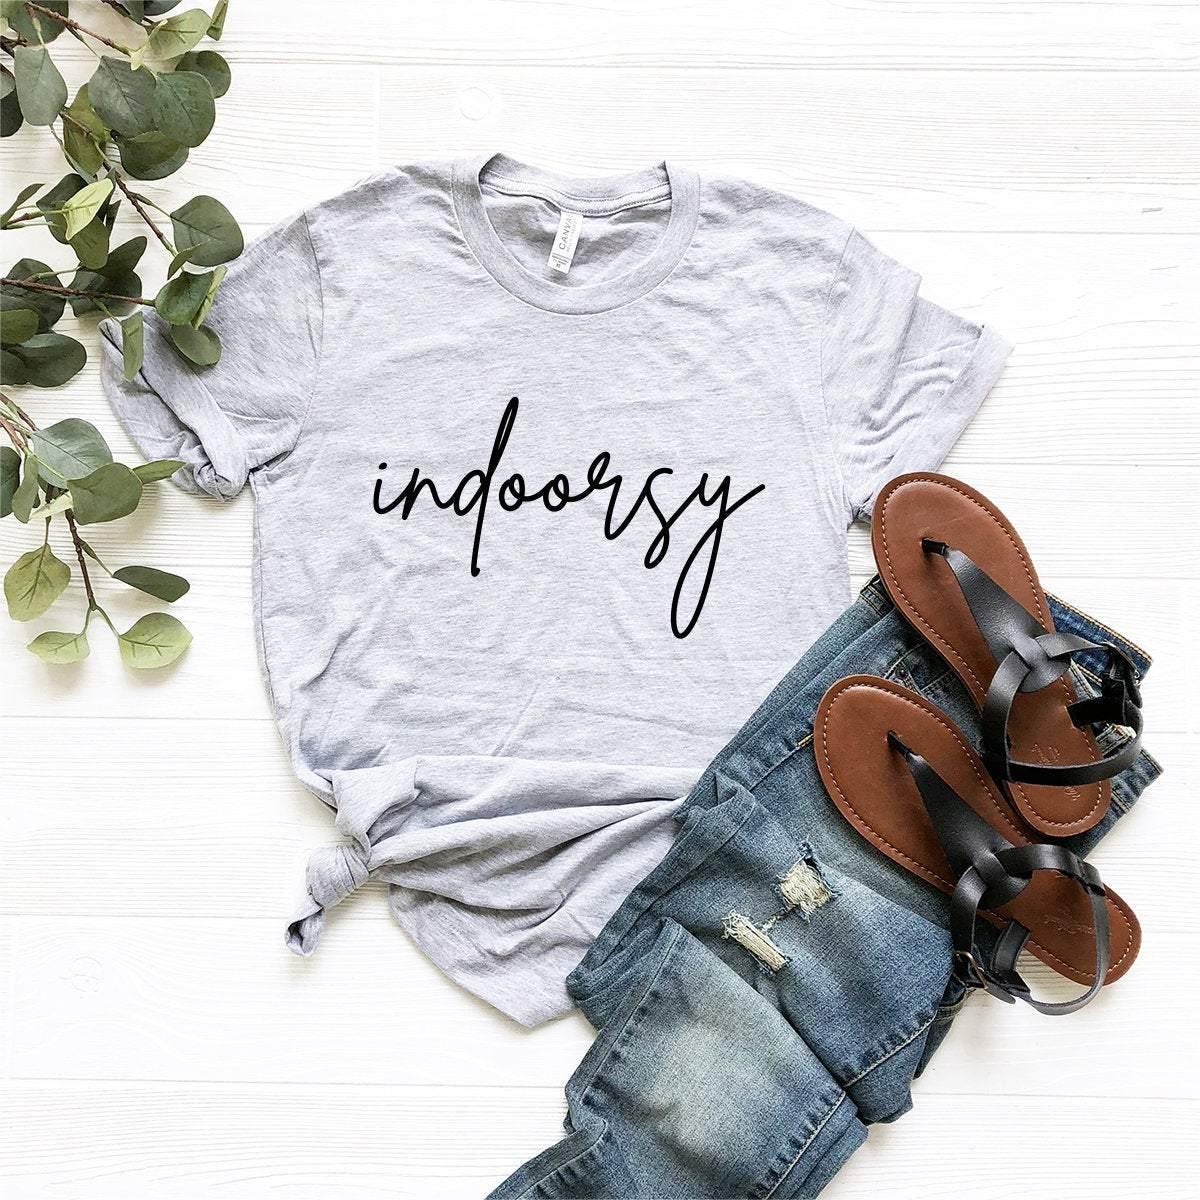 Indoorsy Shirt, Indoorsy T-Shirt, Funny Anti-Social Tee, Introvert Shirt, Anti-Social Shirt, Homebody Shirt, Staying In Tee, Introvert Tee - Fastdeliverytees.com